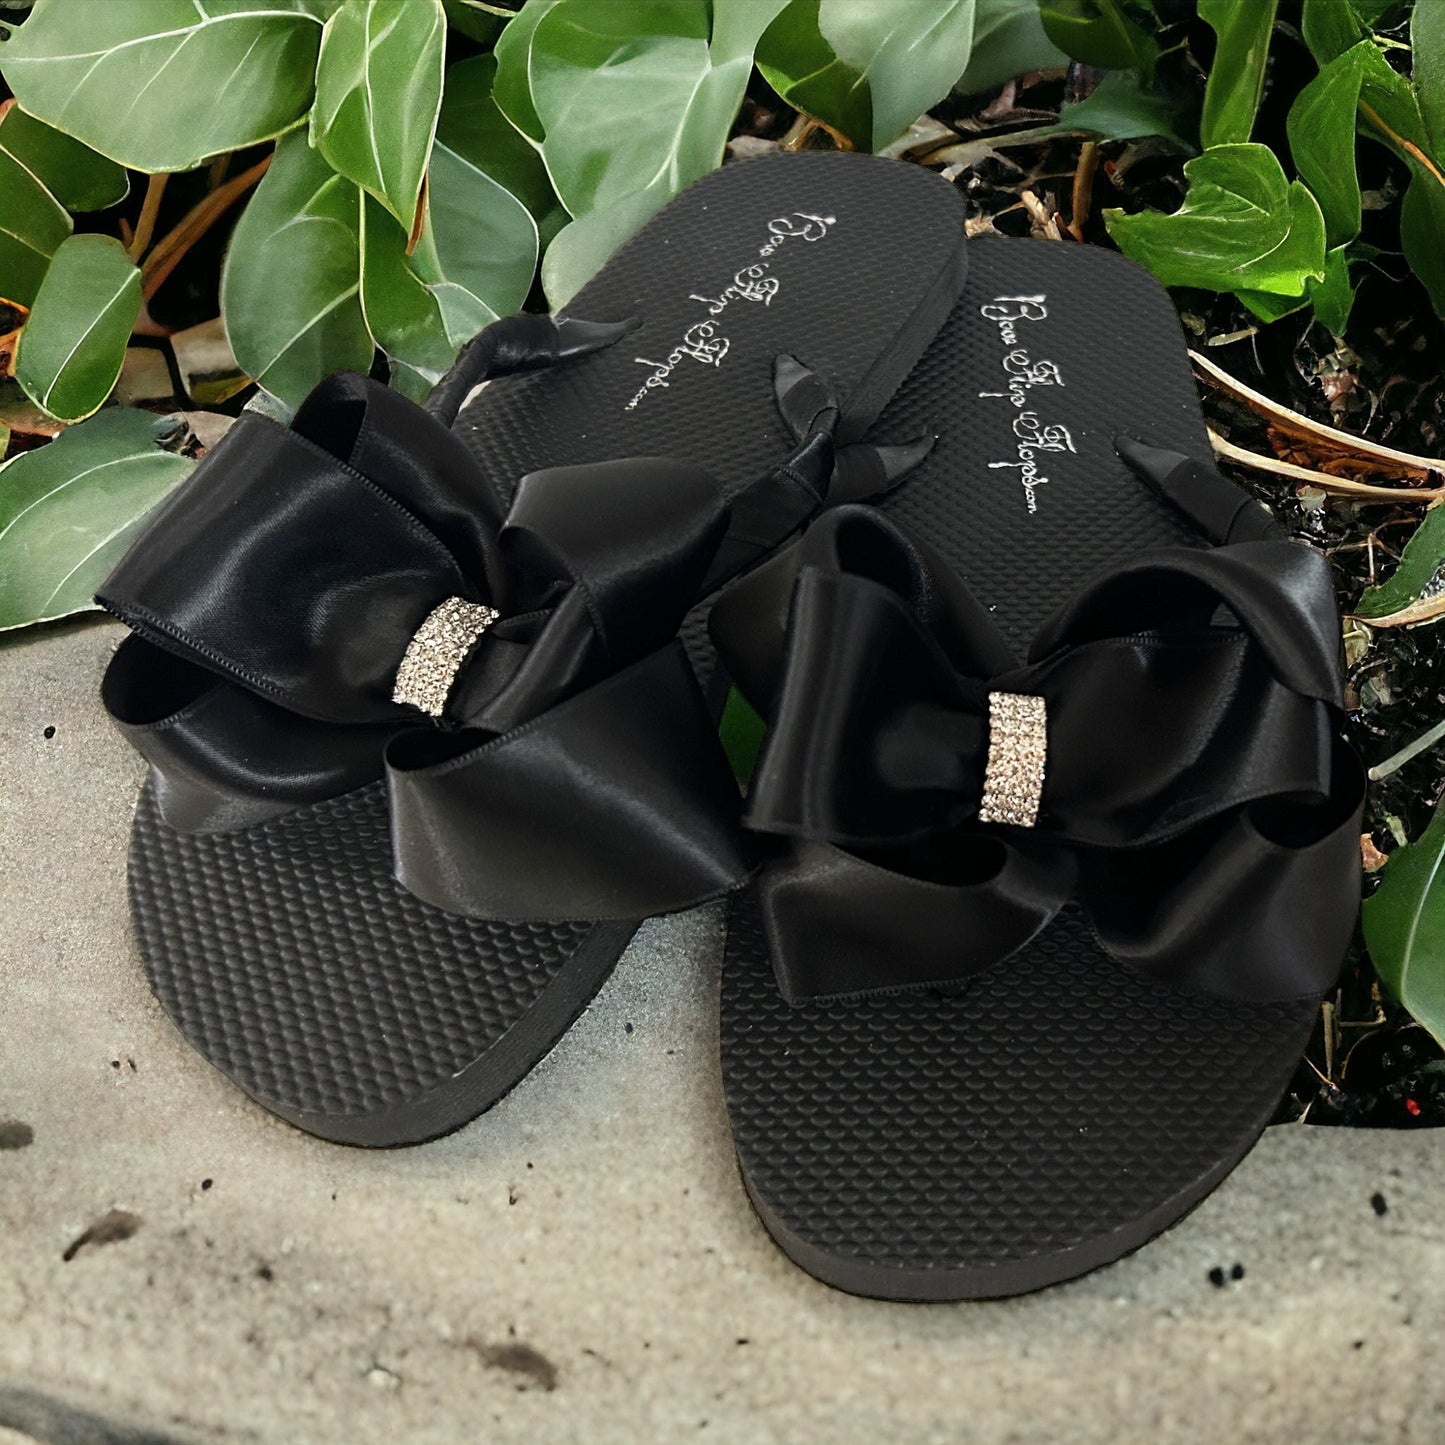 Ivory Pearl & Rhinestone Flip Flops with Black Satin Bows - customize yours